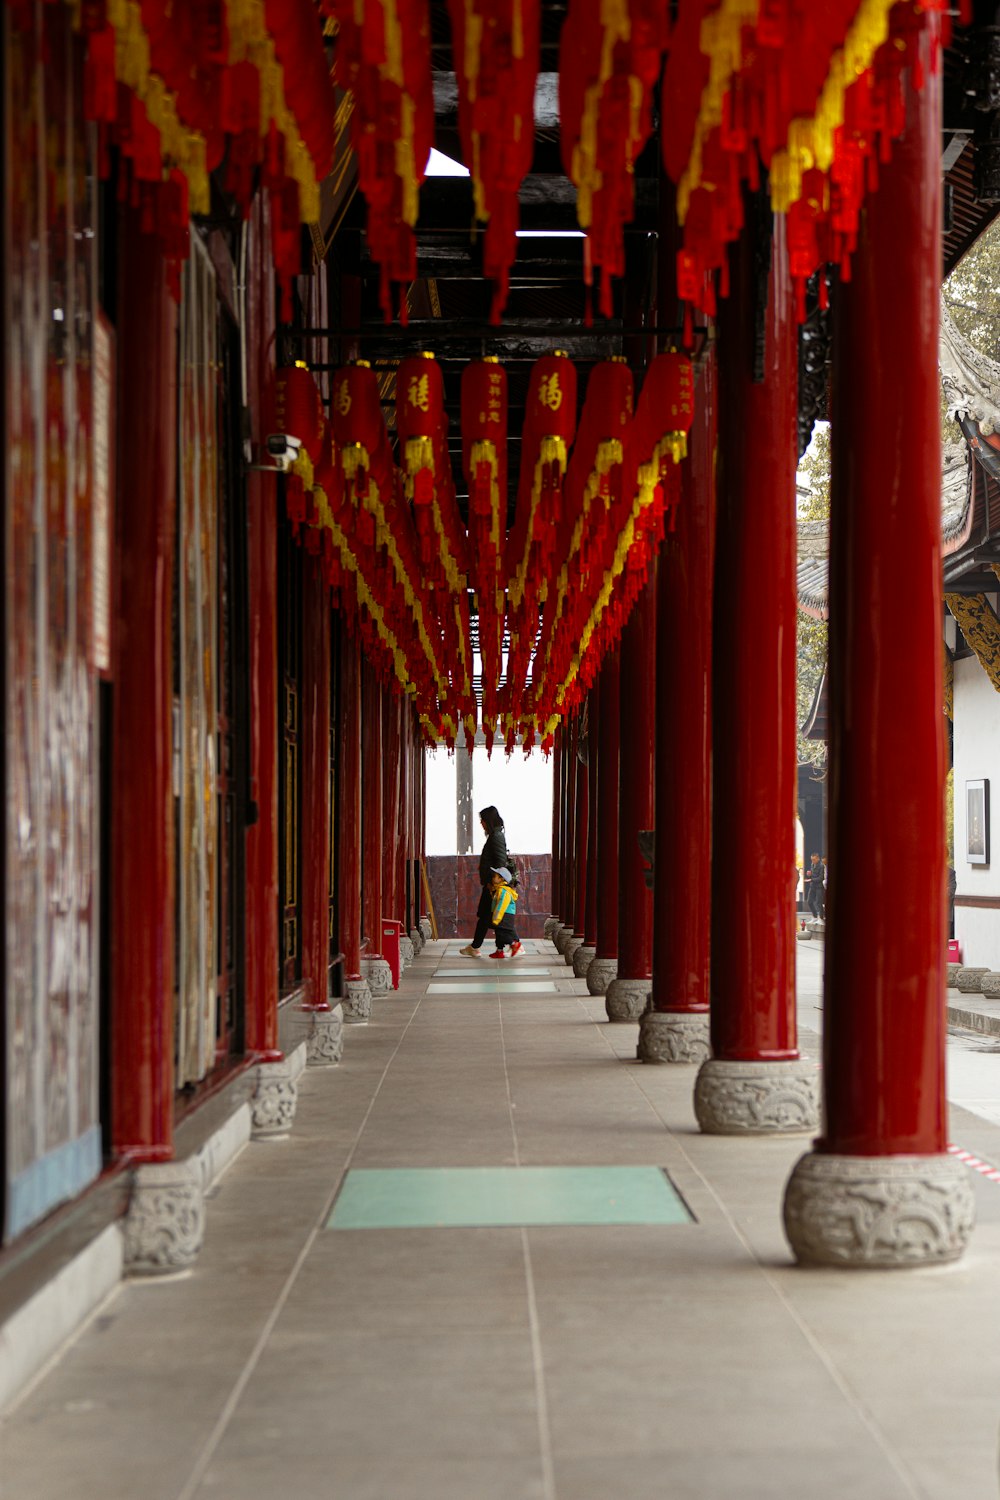 a woman walking down a long hallway covered in red and yellow decorations